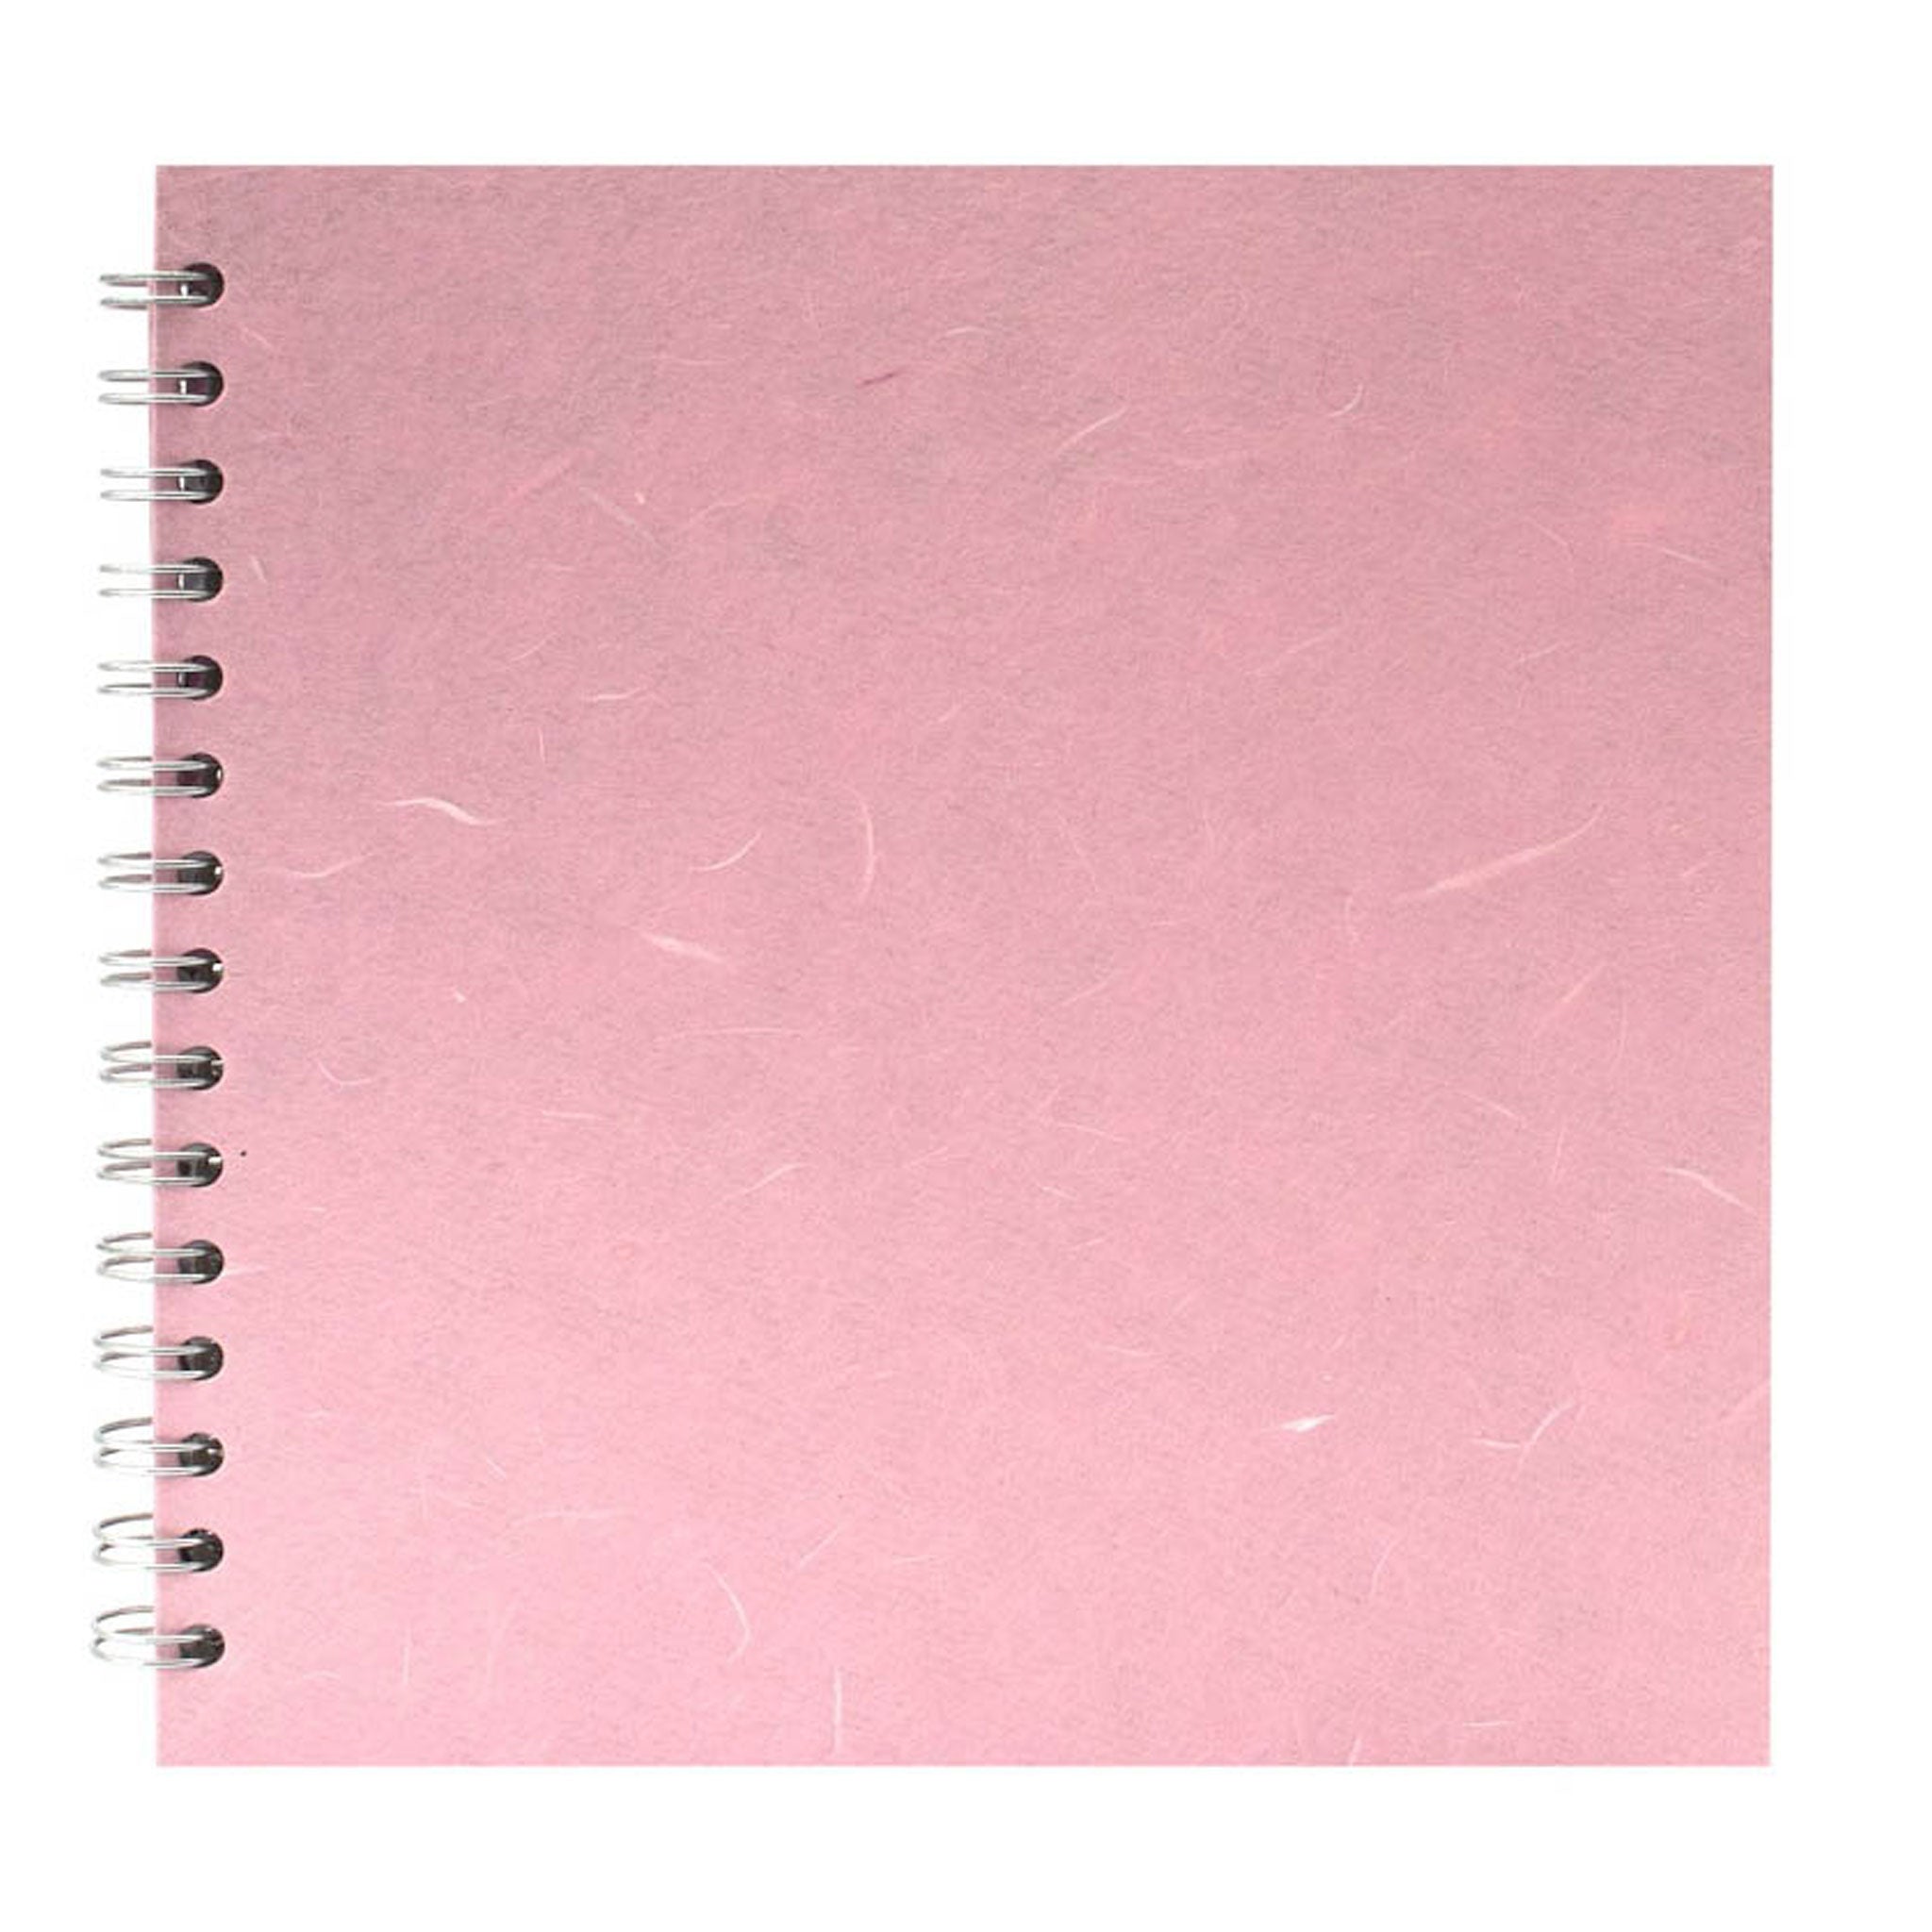 Cute Pig Sketchbook: Bleedproof sketchbook for Drawing, Sketching and  Writing. 120 pages. Paper size 8.5 x 11 . Cute pink pig cover book for kids  and